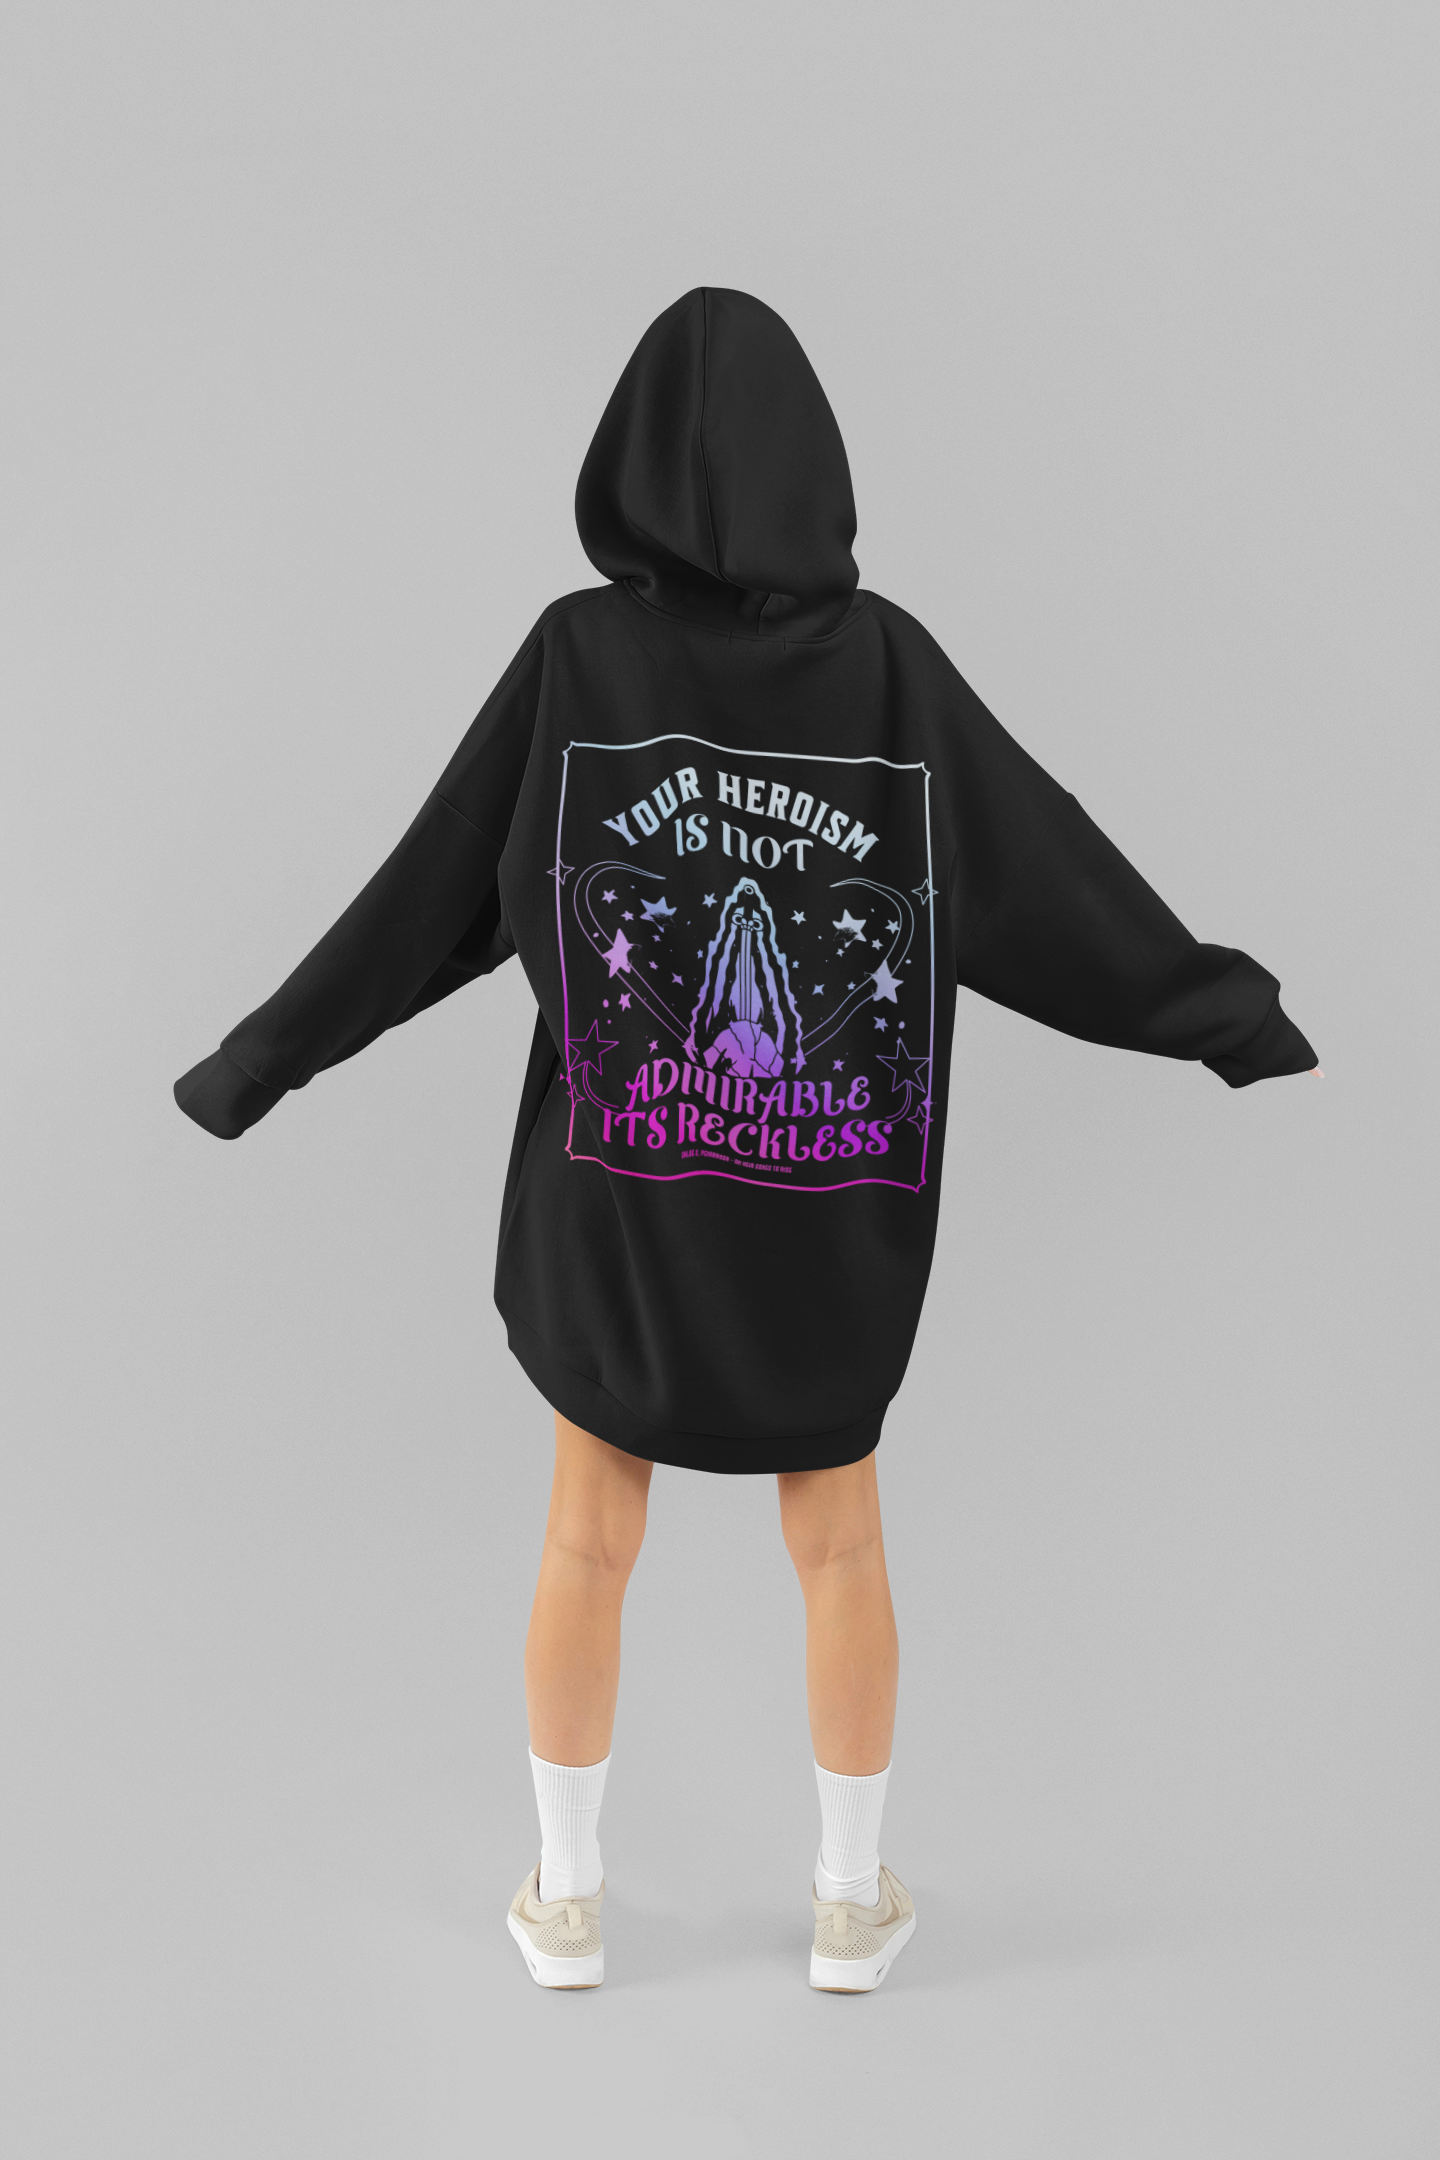 Your Heroism is Not Admirable - Chloe C. Penaranda - Officially Licensed - Hoodie - An Heir Comes to Rise - AHCTR